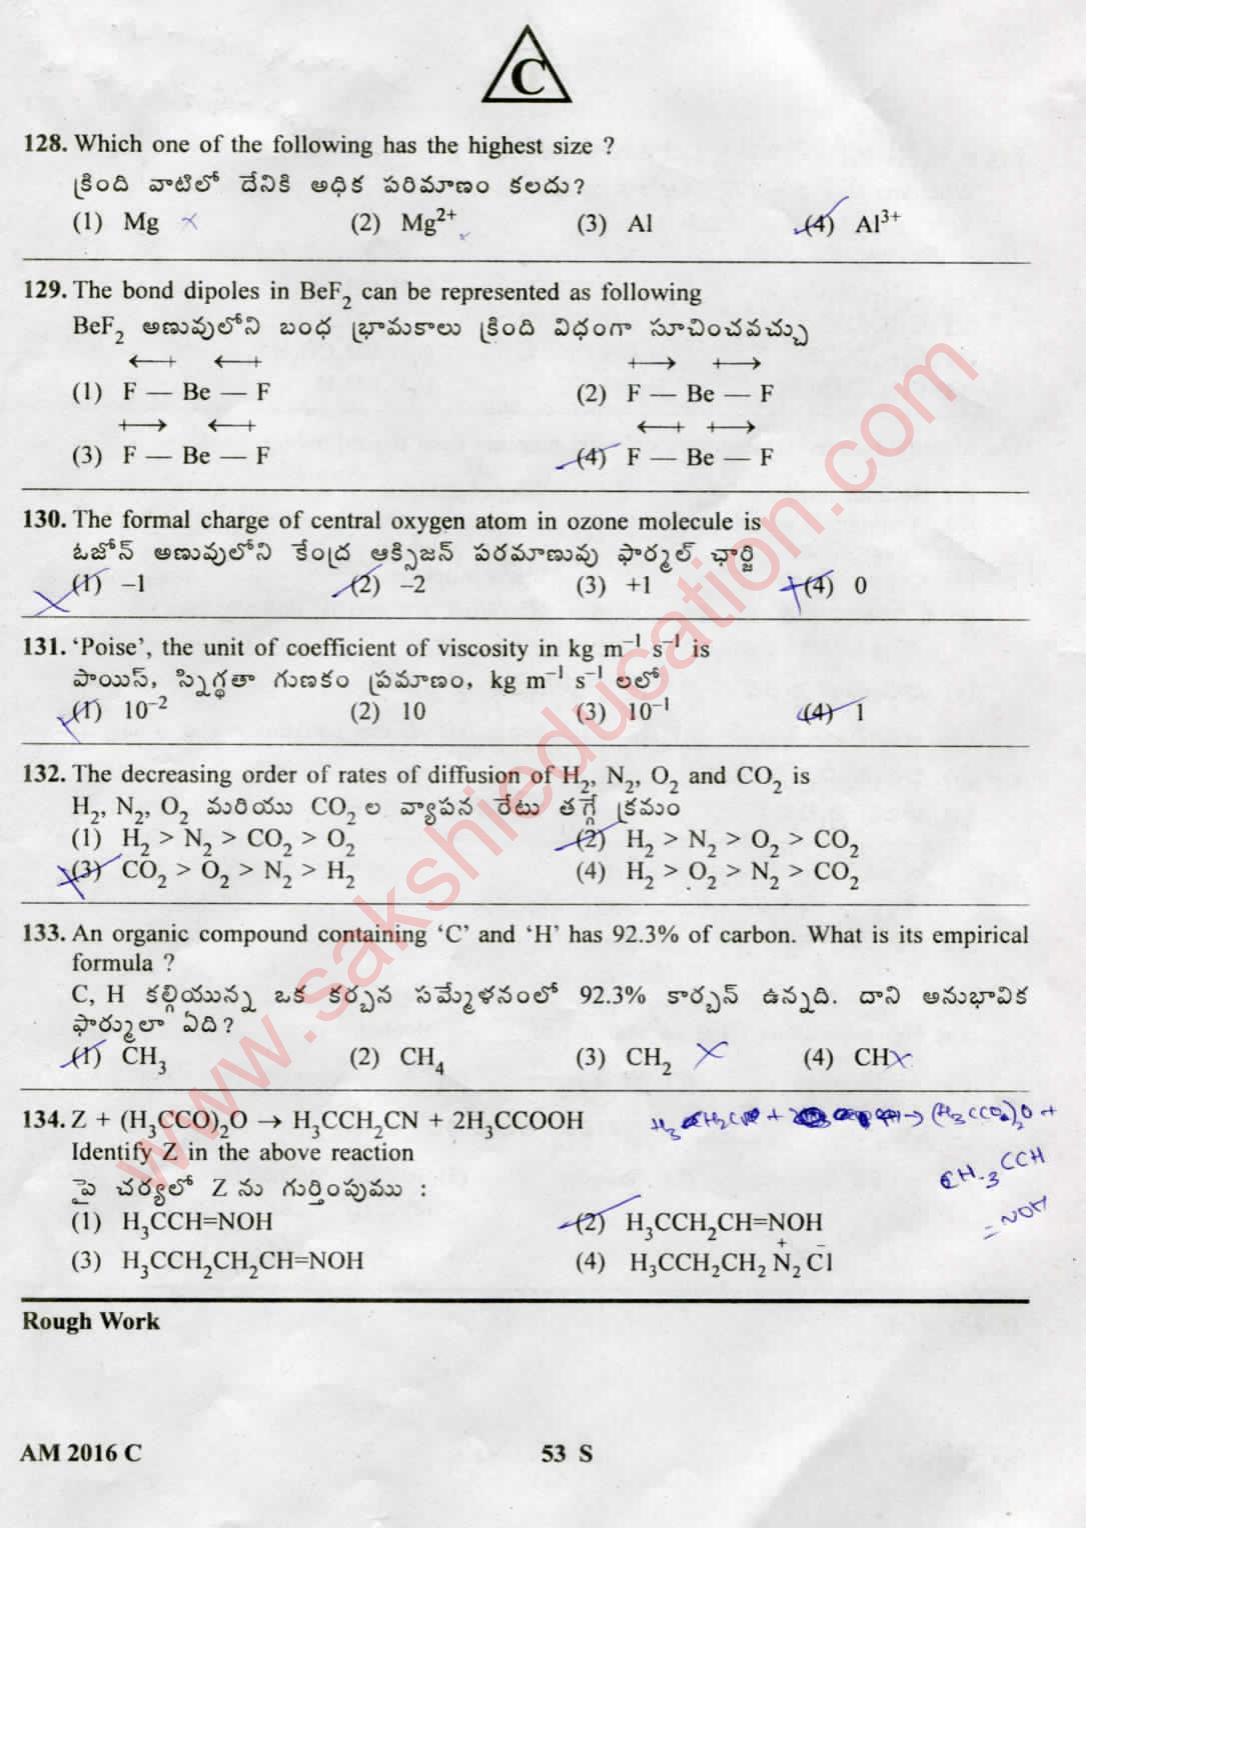 TS EAMCET 2016 Medical Question Paper with Key (Held on 15 May 2016) - Page 53